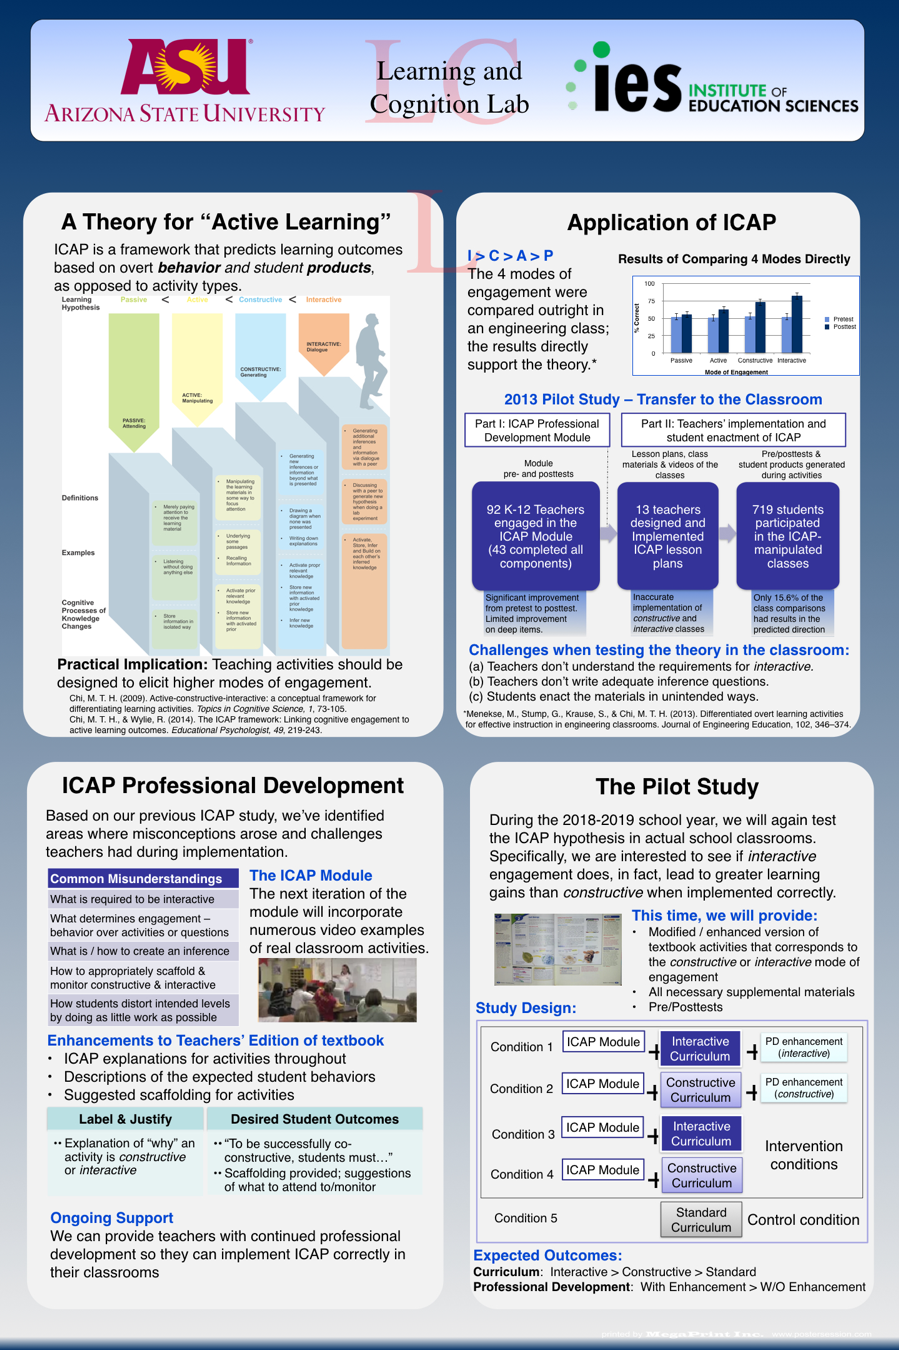 ICAP infographic showing a theory for "Active Learning" and application of ICAP